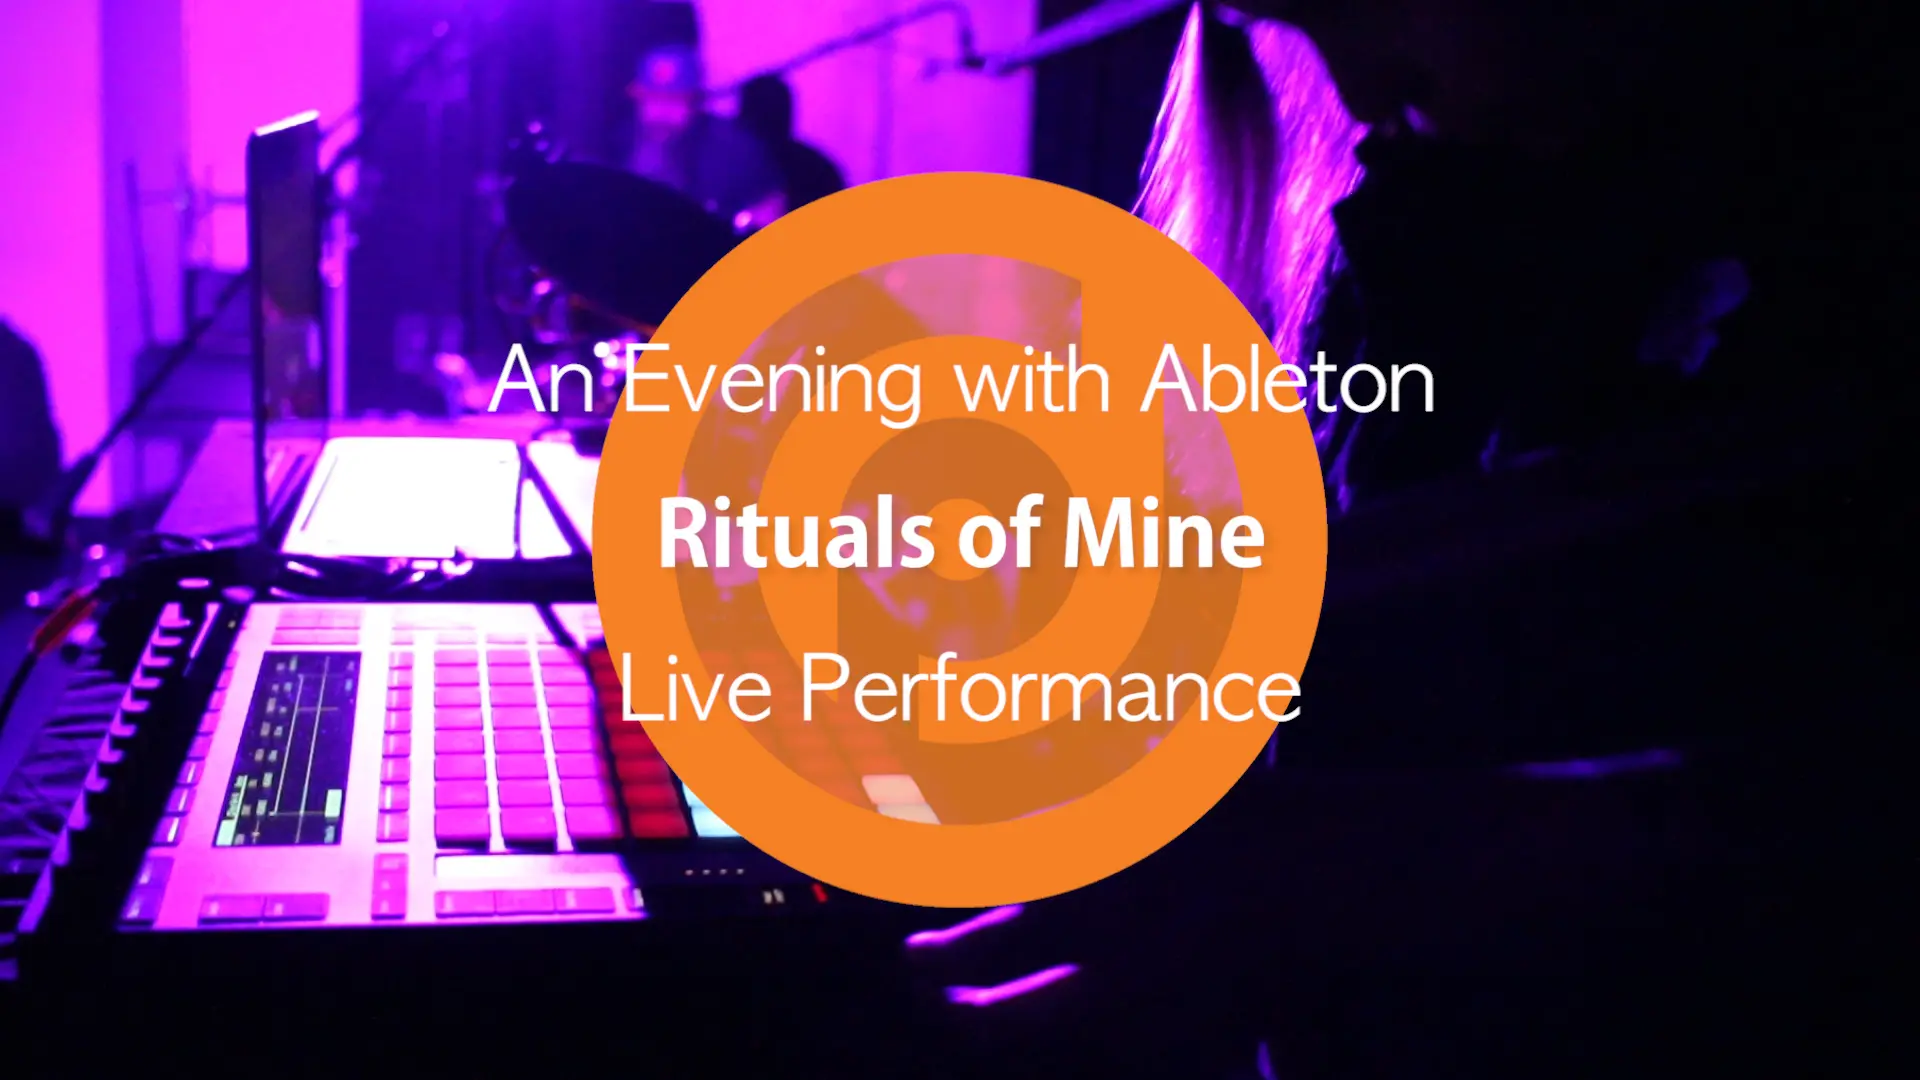 An evening with adlton, a music producer, showcasing his beatmaking skills in a live performance.